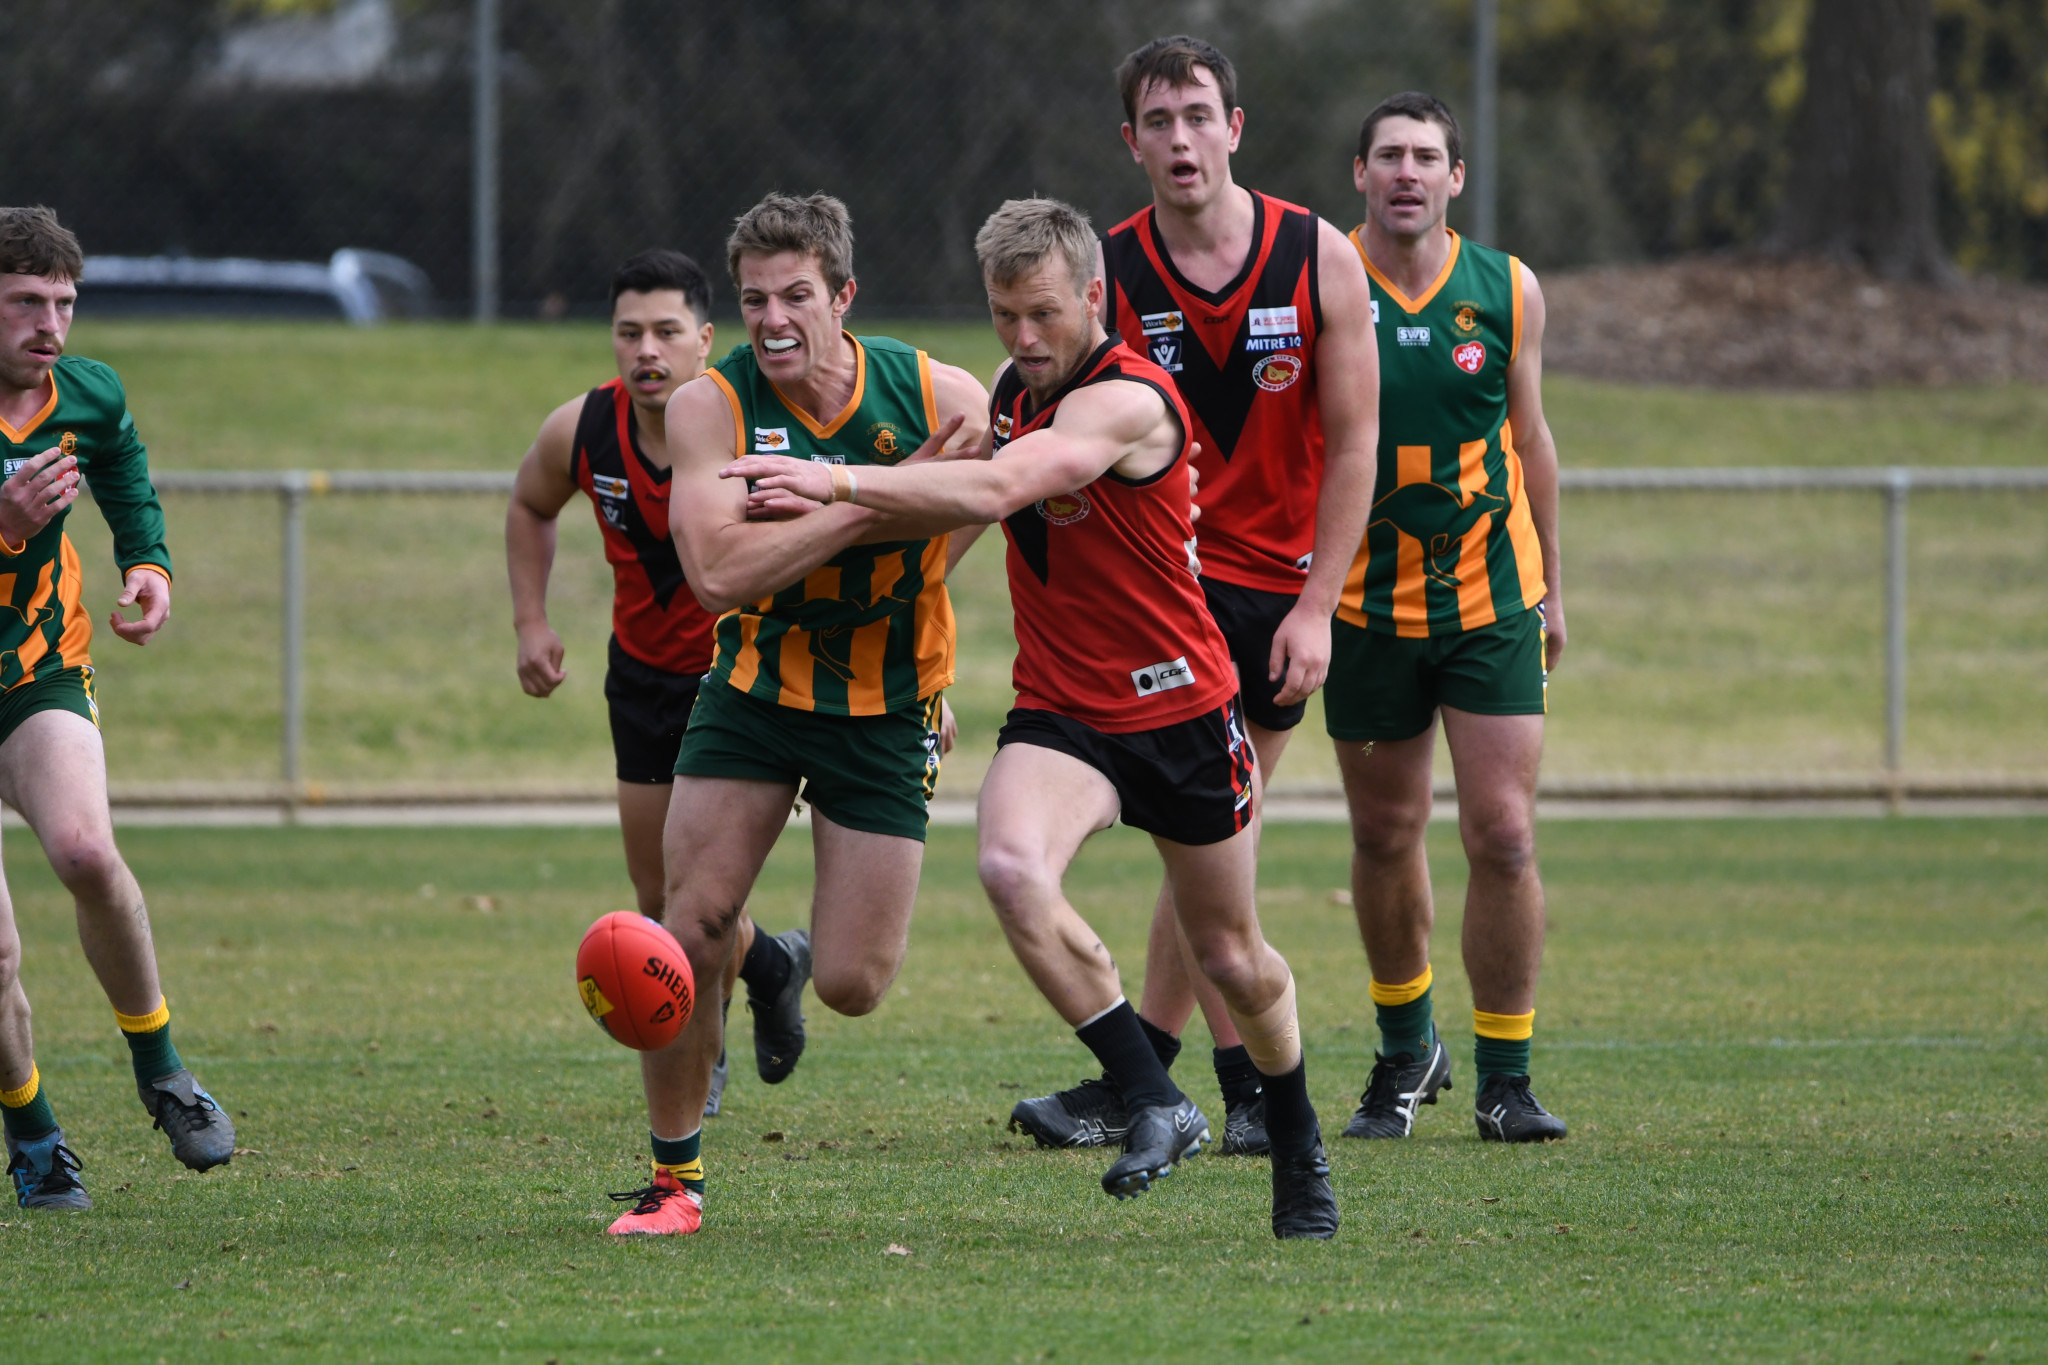 Stawell's Tom Eckel (right) is the best midfielder in the current competition, the favorite to take out another Toohey medal for league best and fairest, and potentially coach of the year. PHOTO: STEPHEN WALKER